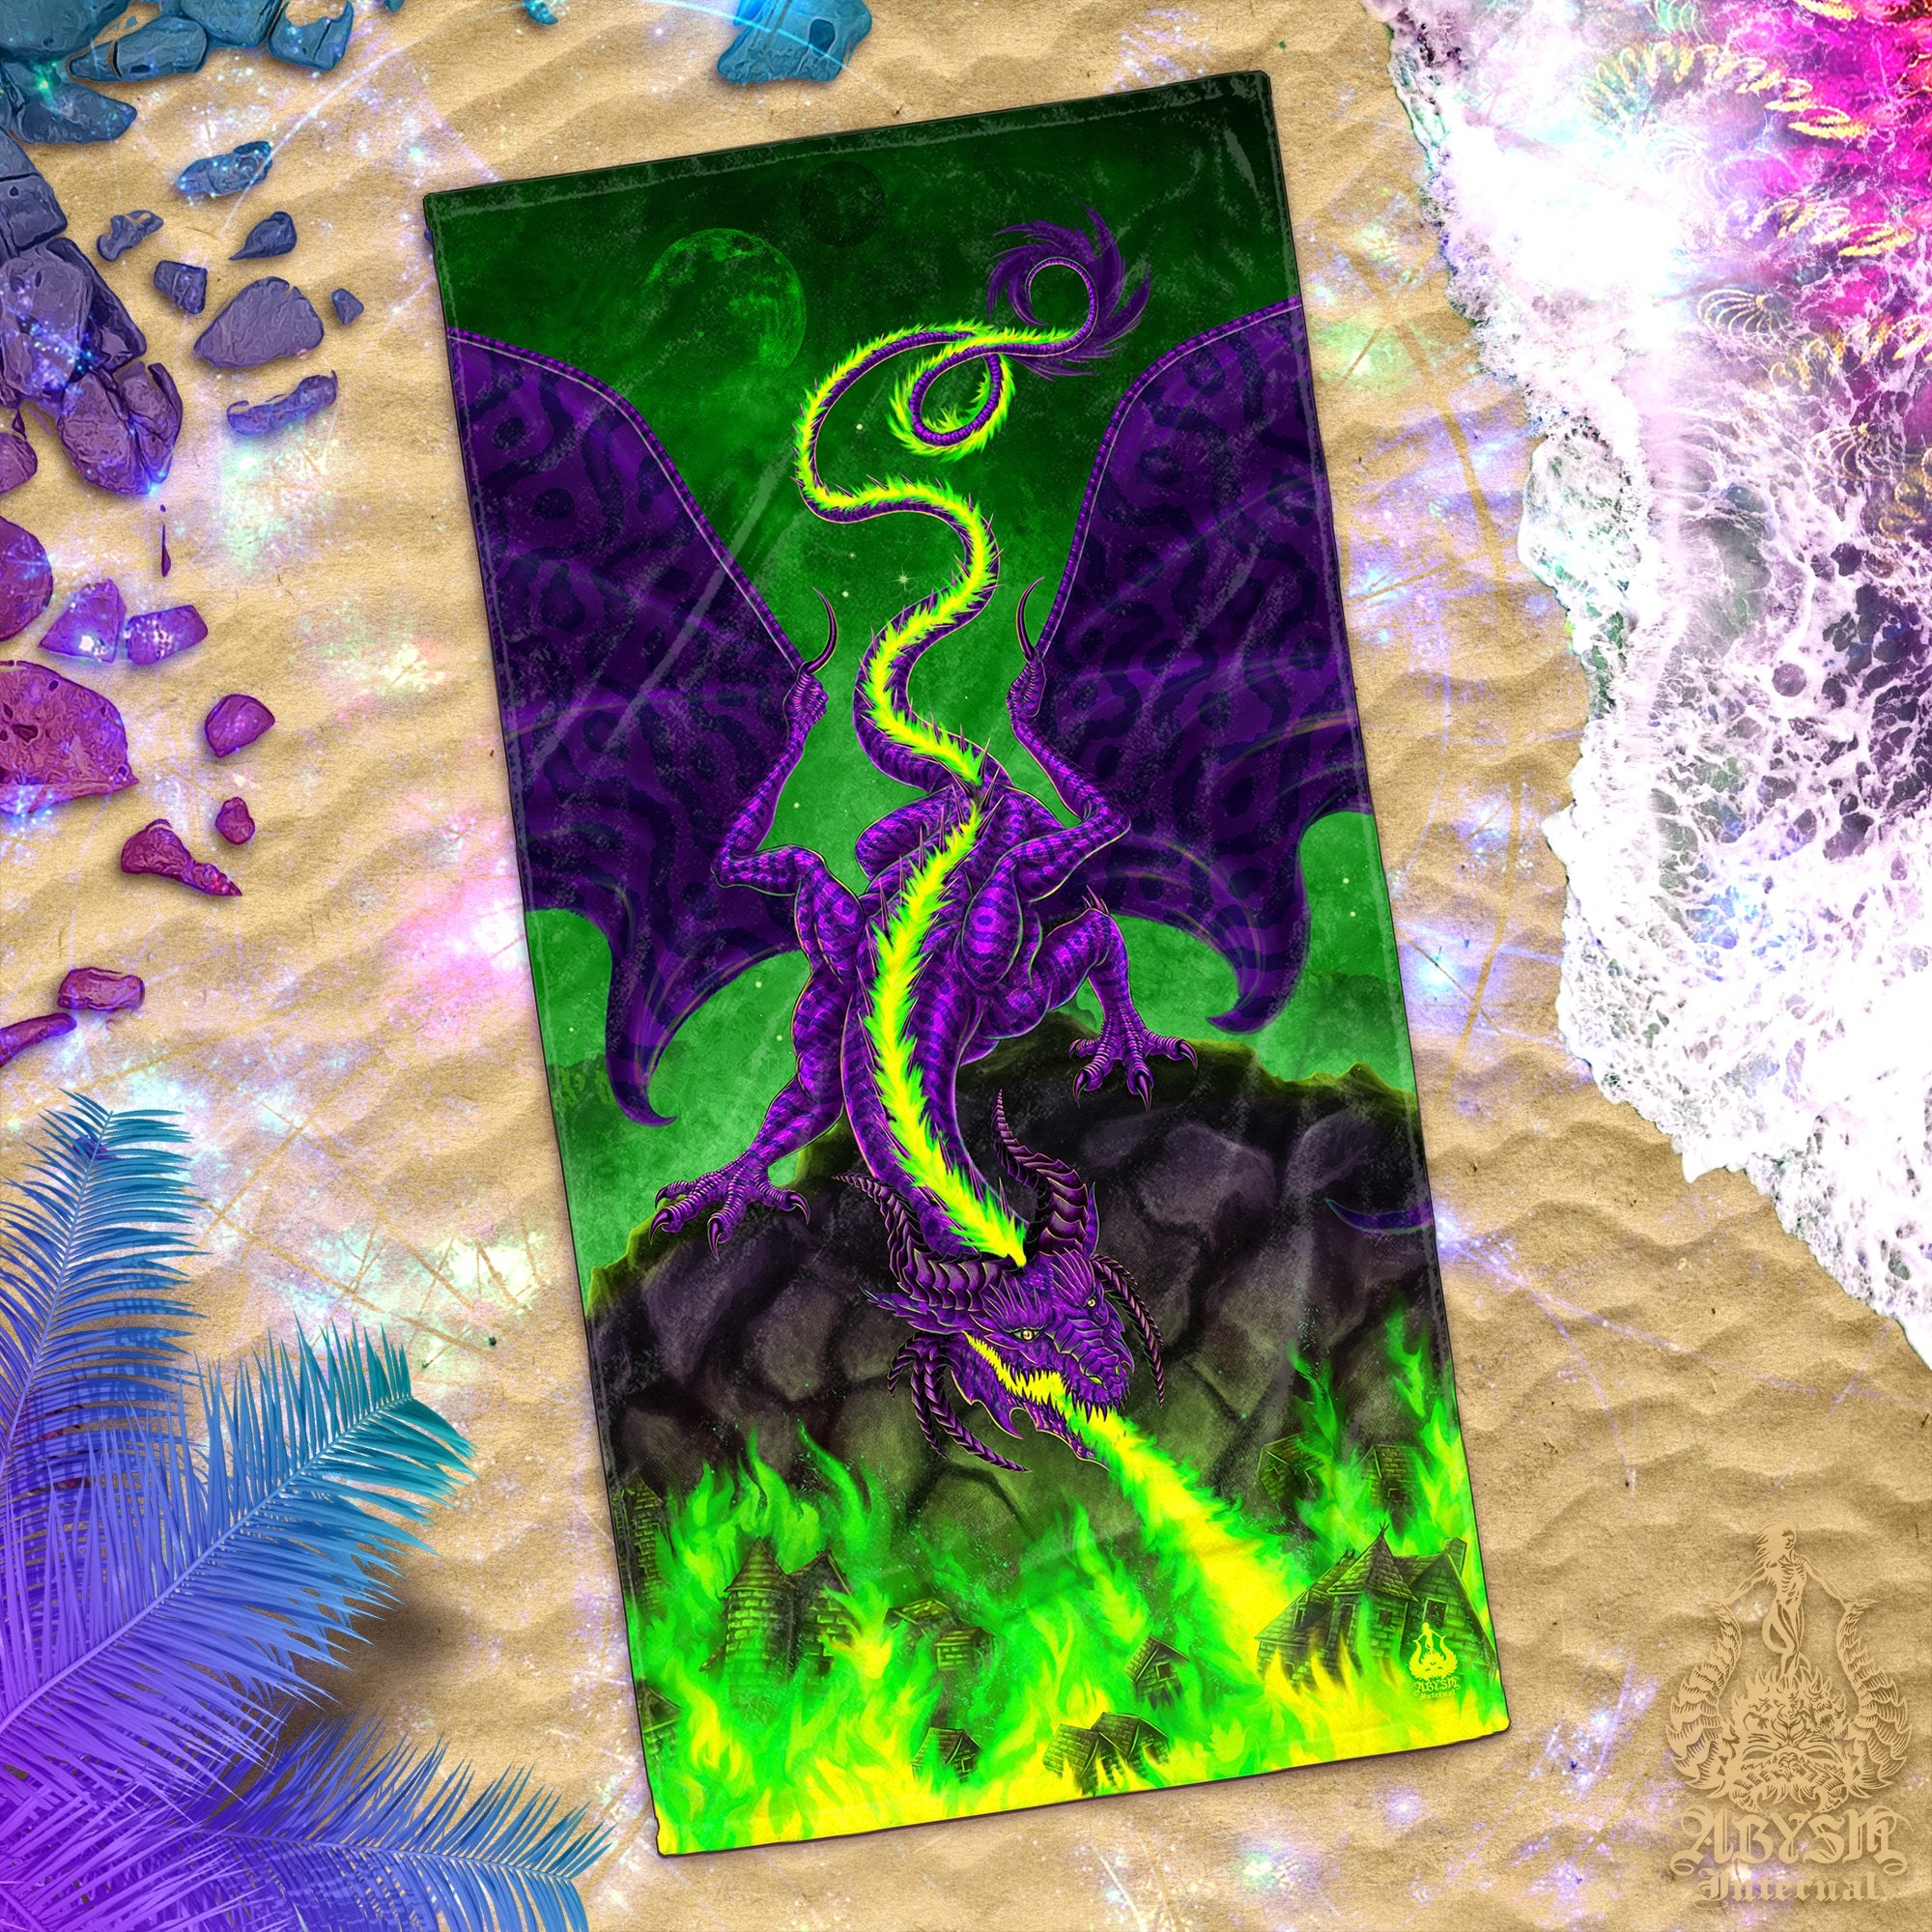 ALL Fire Dragon Beach Towel Designs, Gift Idea for Gamer or DM - 10 Colors - Abysm Internal